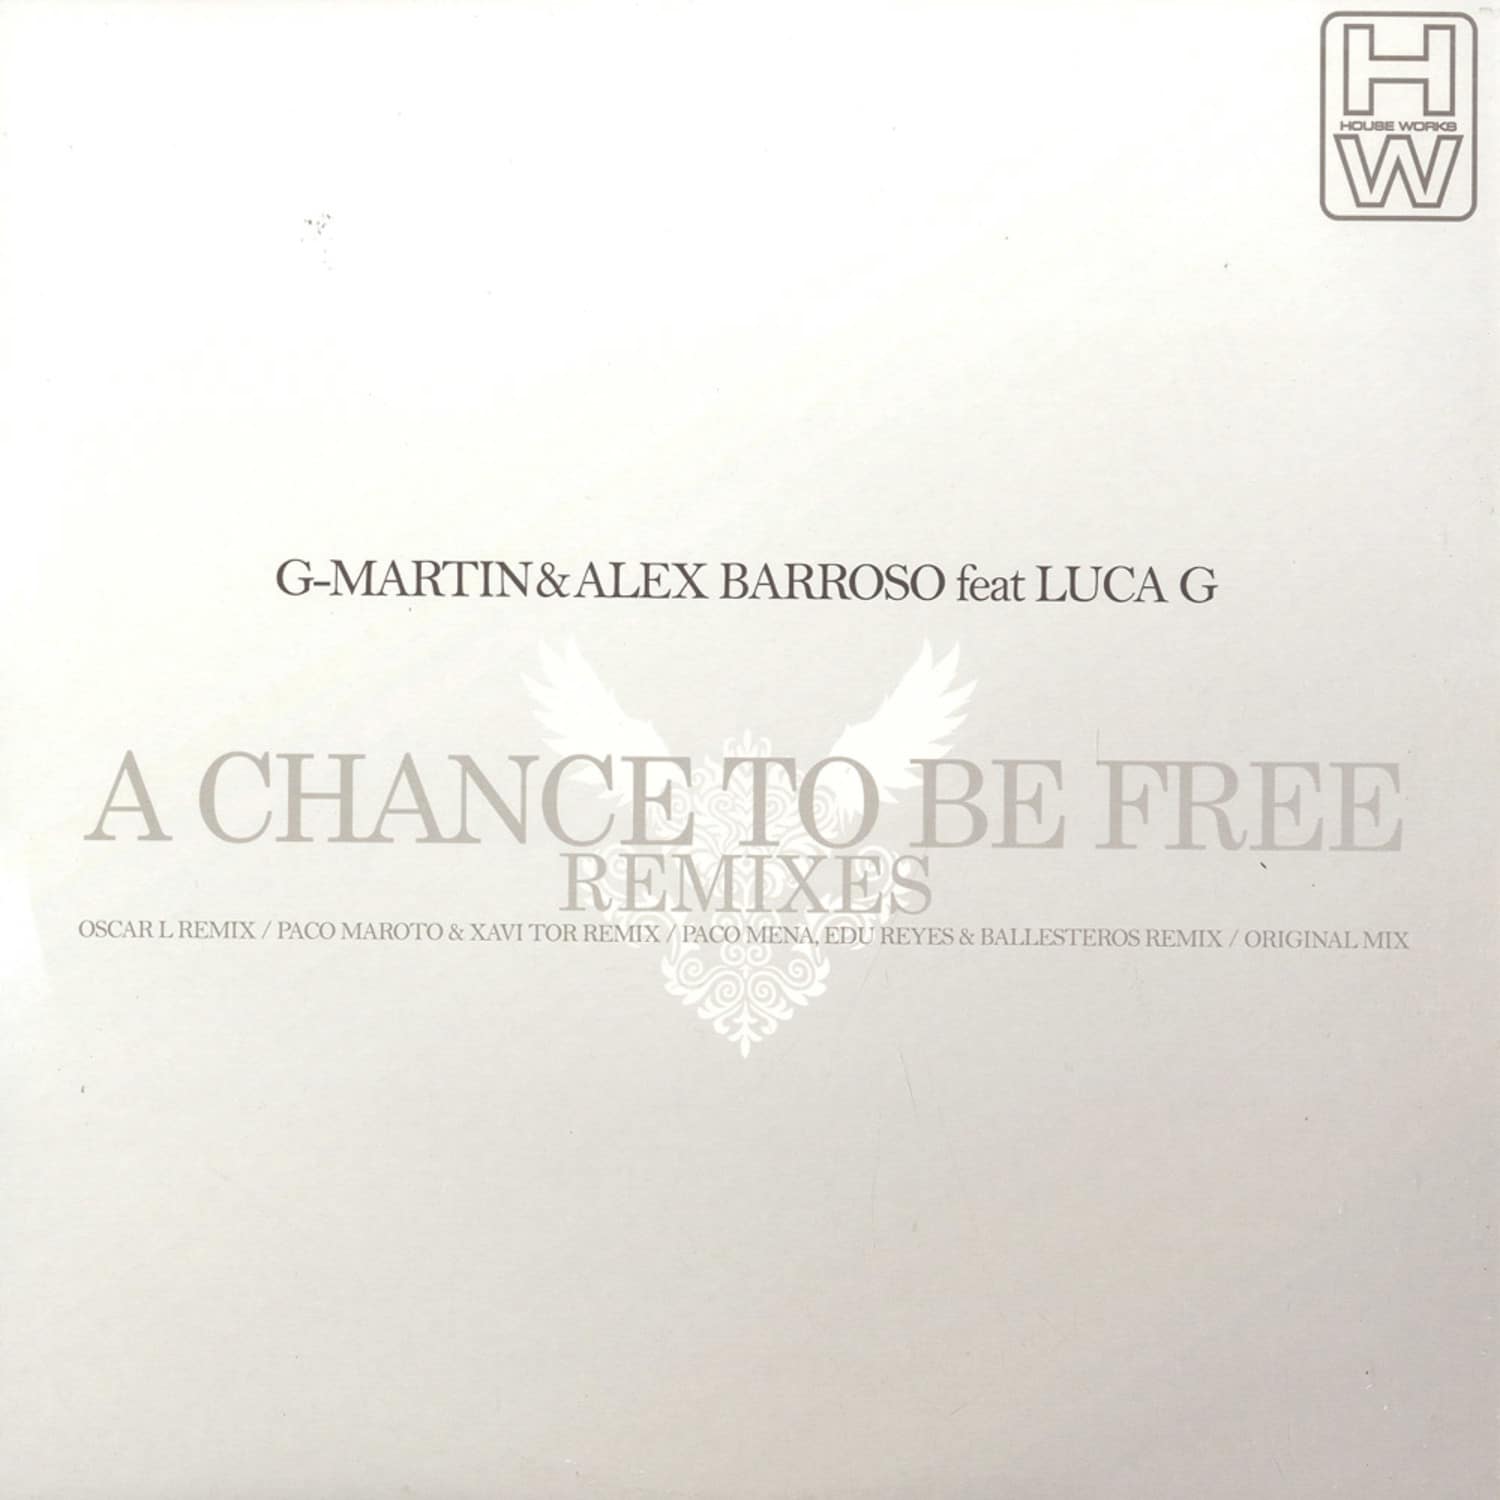 G-Martin & Alex Barroso feat. Luca G. - A CHANCE TO BE FREE 